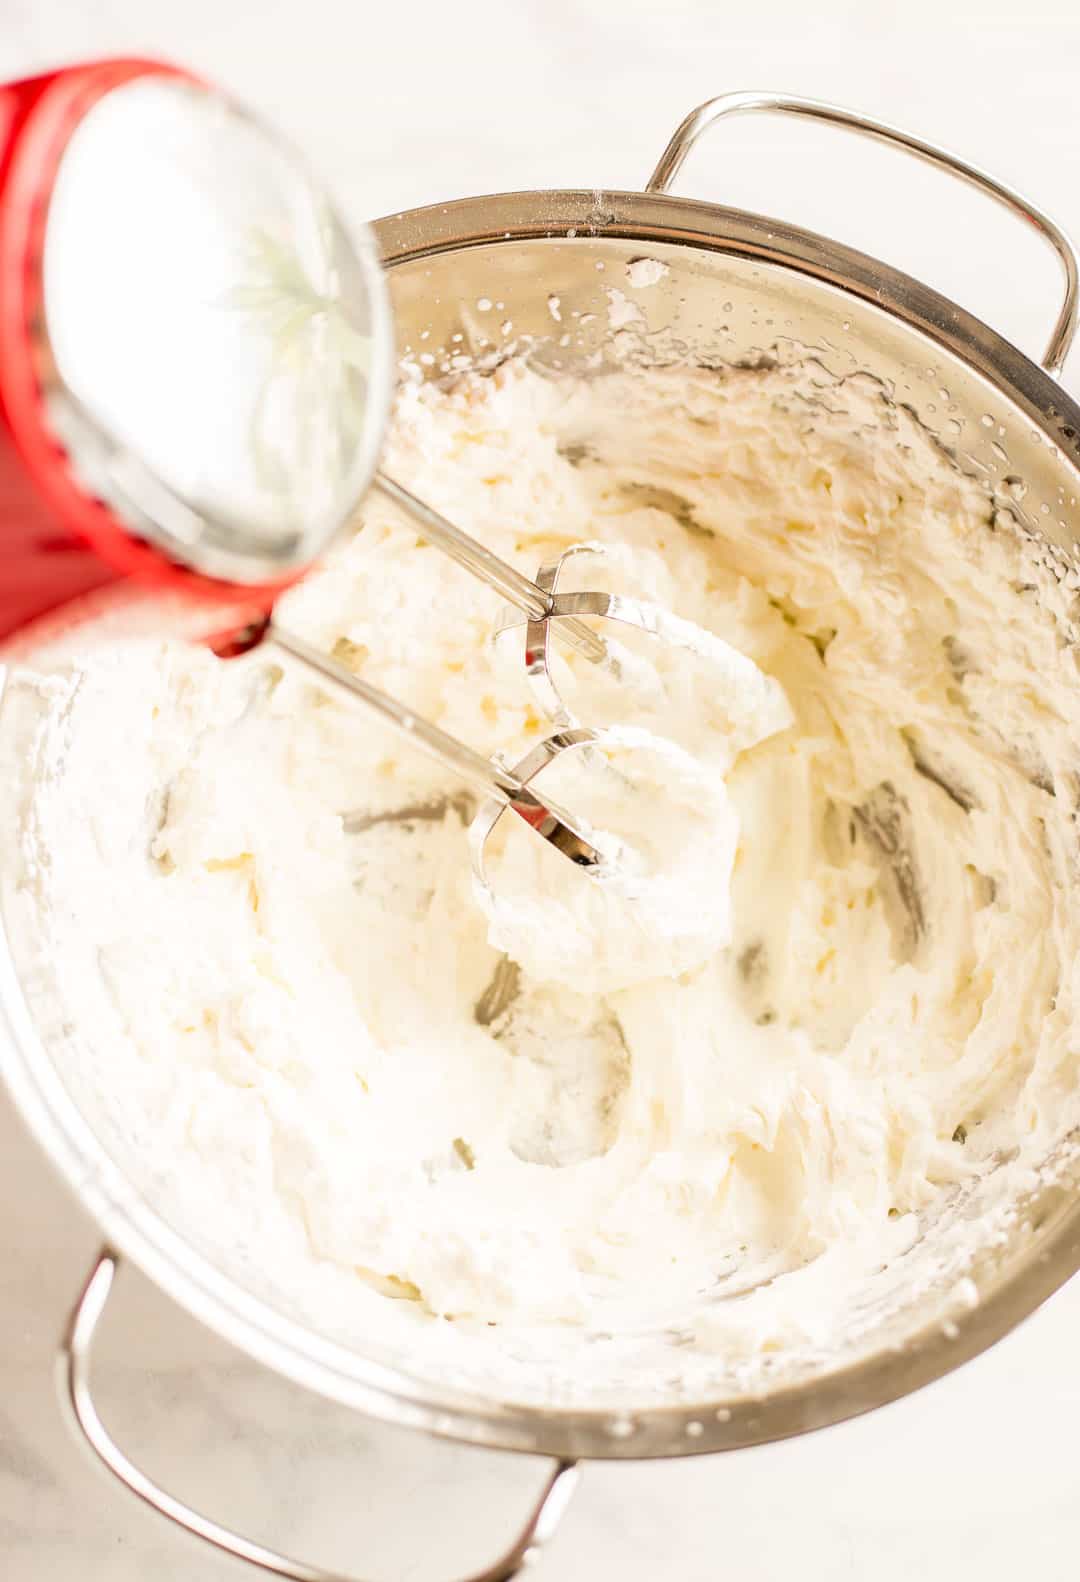 Using a mixer to make whipped cream